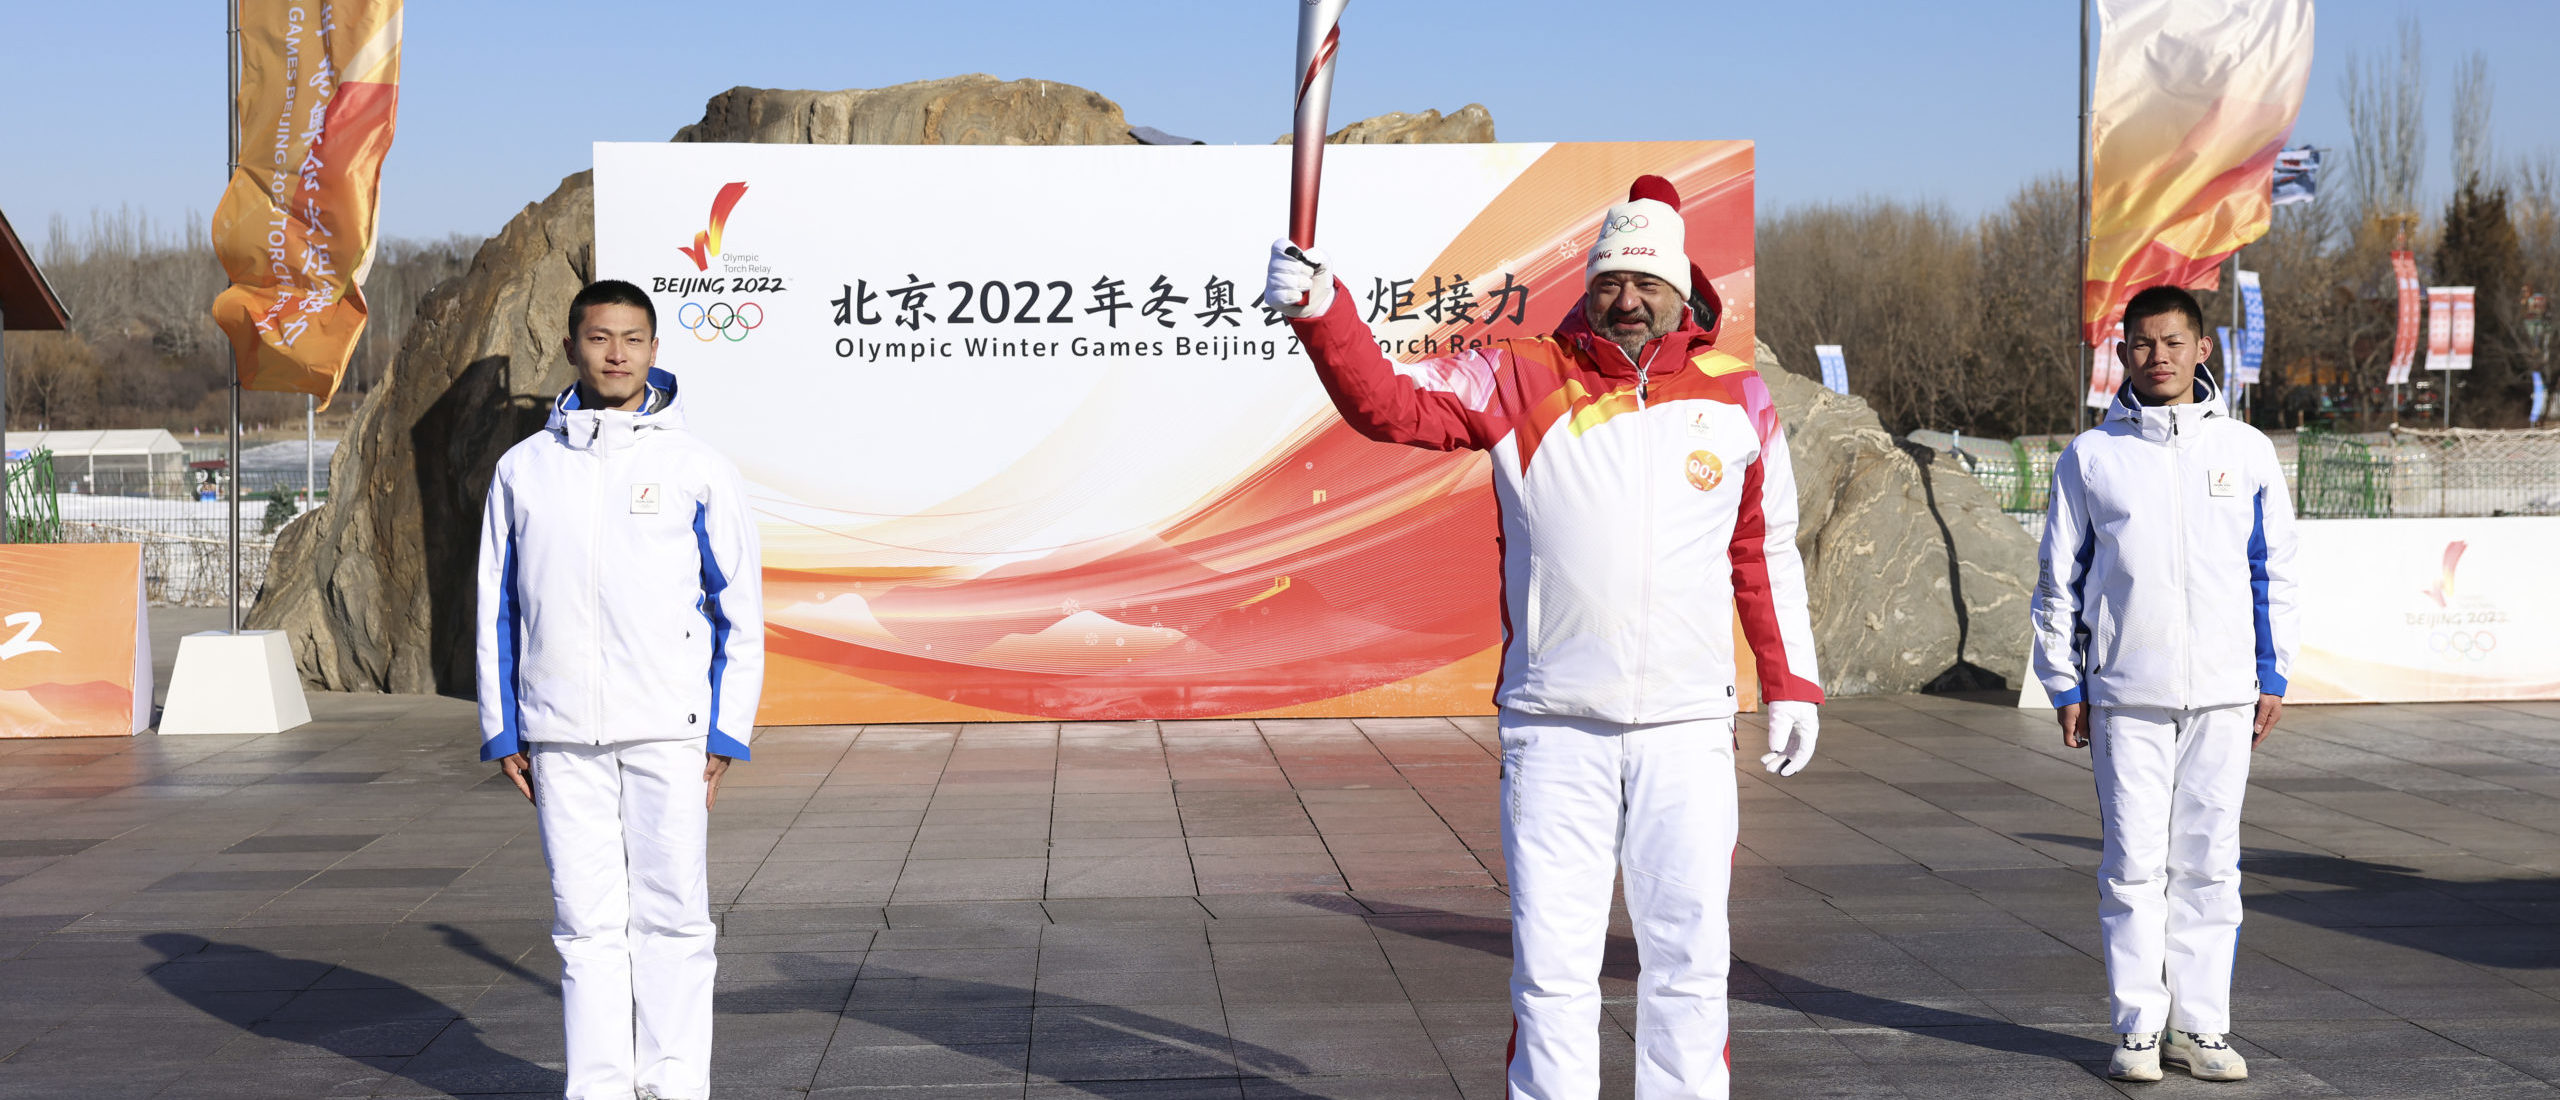 Ianis Eksakes, CEO of the Olympic Broadcasting Service Company attend the Beijing 2022 Winter Olympics Torch Relay at the Beijing Olympic Park in Beijing on February 04, 2022 in Beijing, China. (Photo by Lintao Zhang/Getty Images)